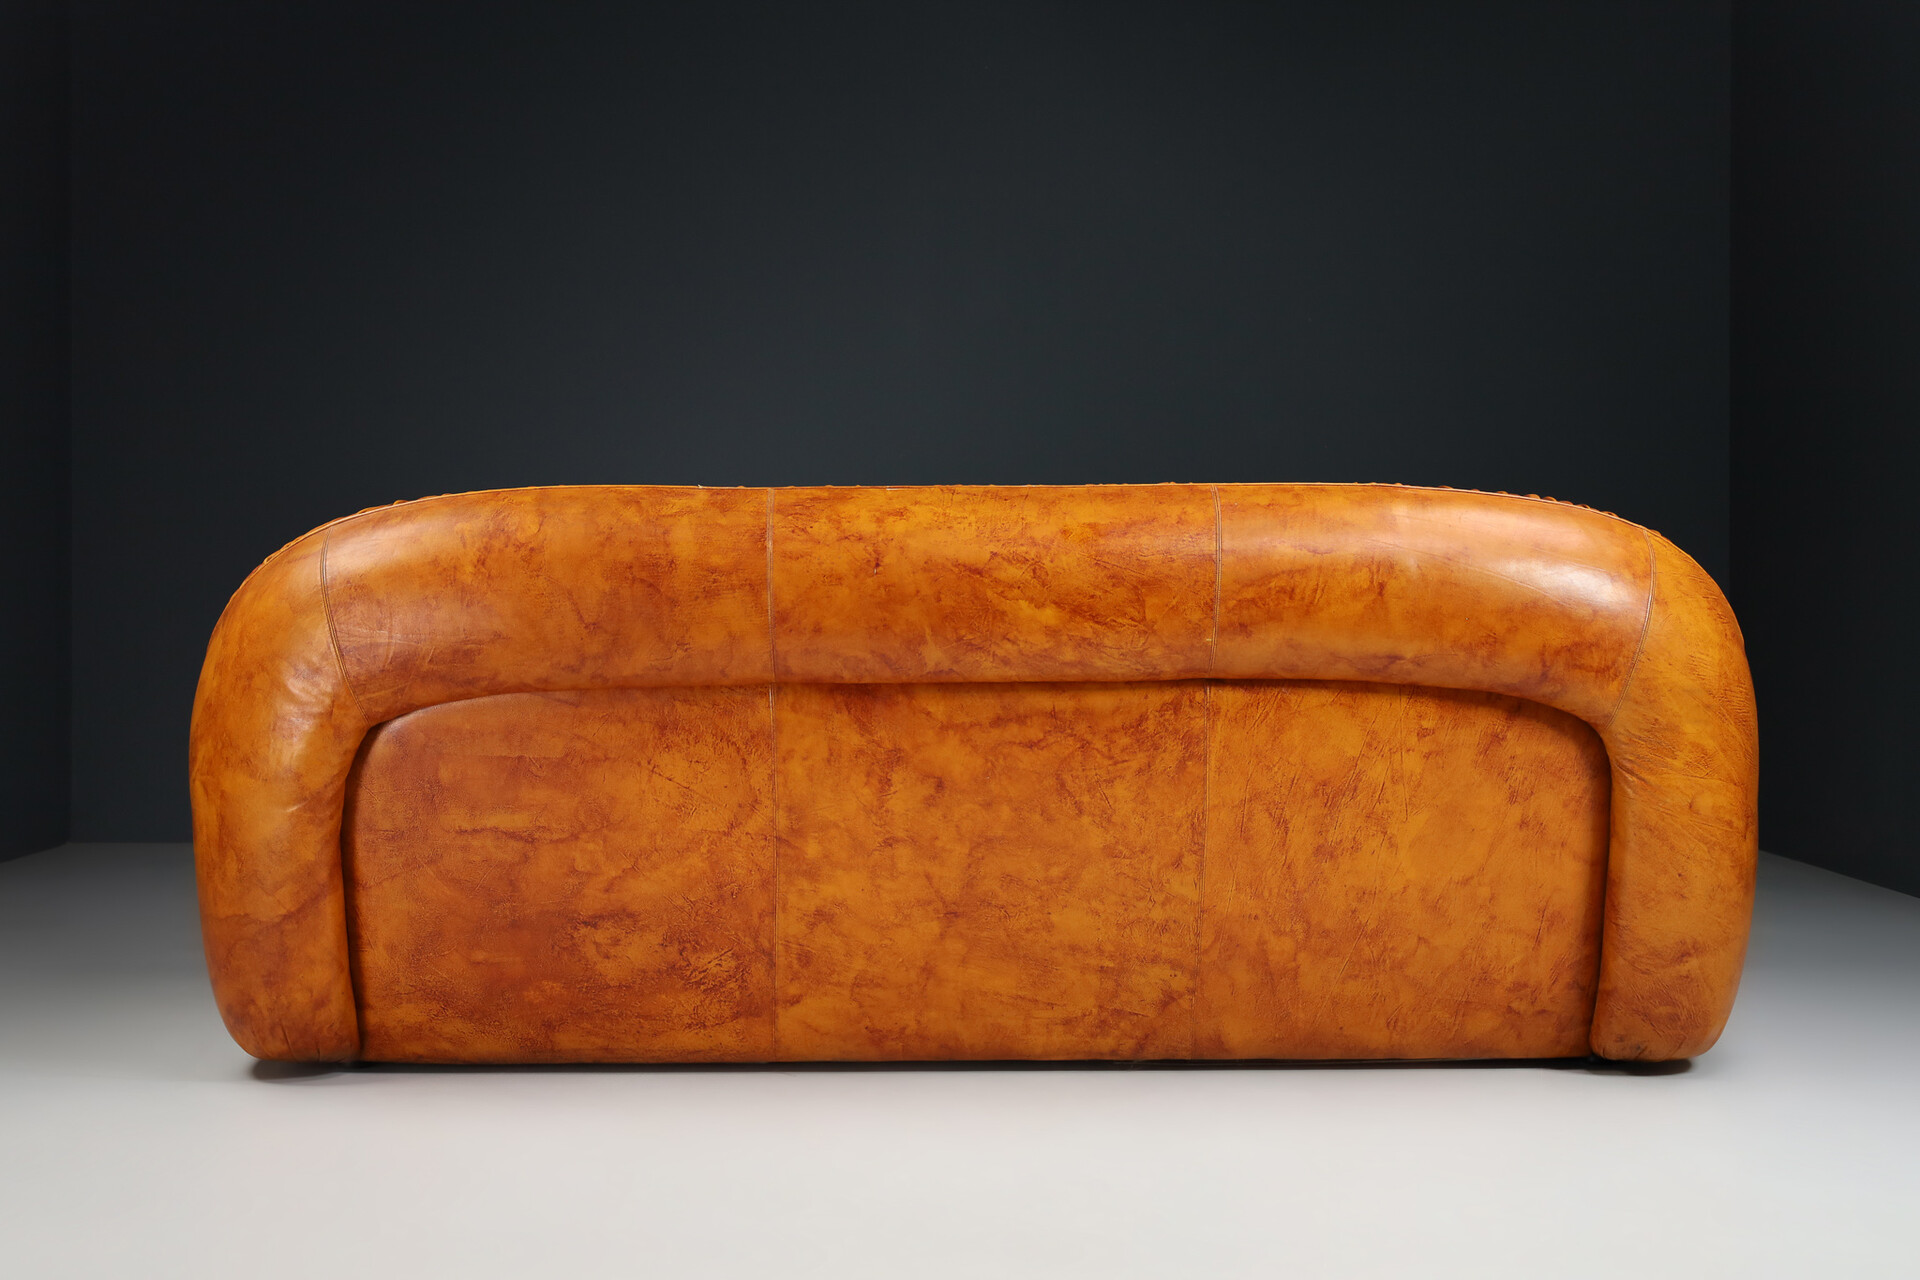 Mid century modern Lounge sofa original - - 1970s in \'Capriccio\' Sofas George - for Seating designed by leather, Benches Late-20th model Bighinello Davidowski Italy century brown and Eurosalotto